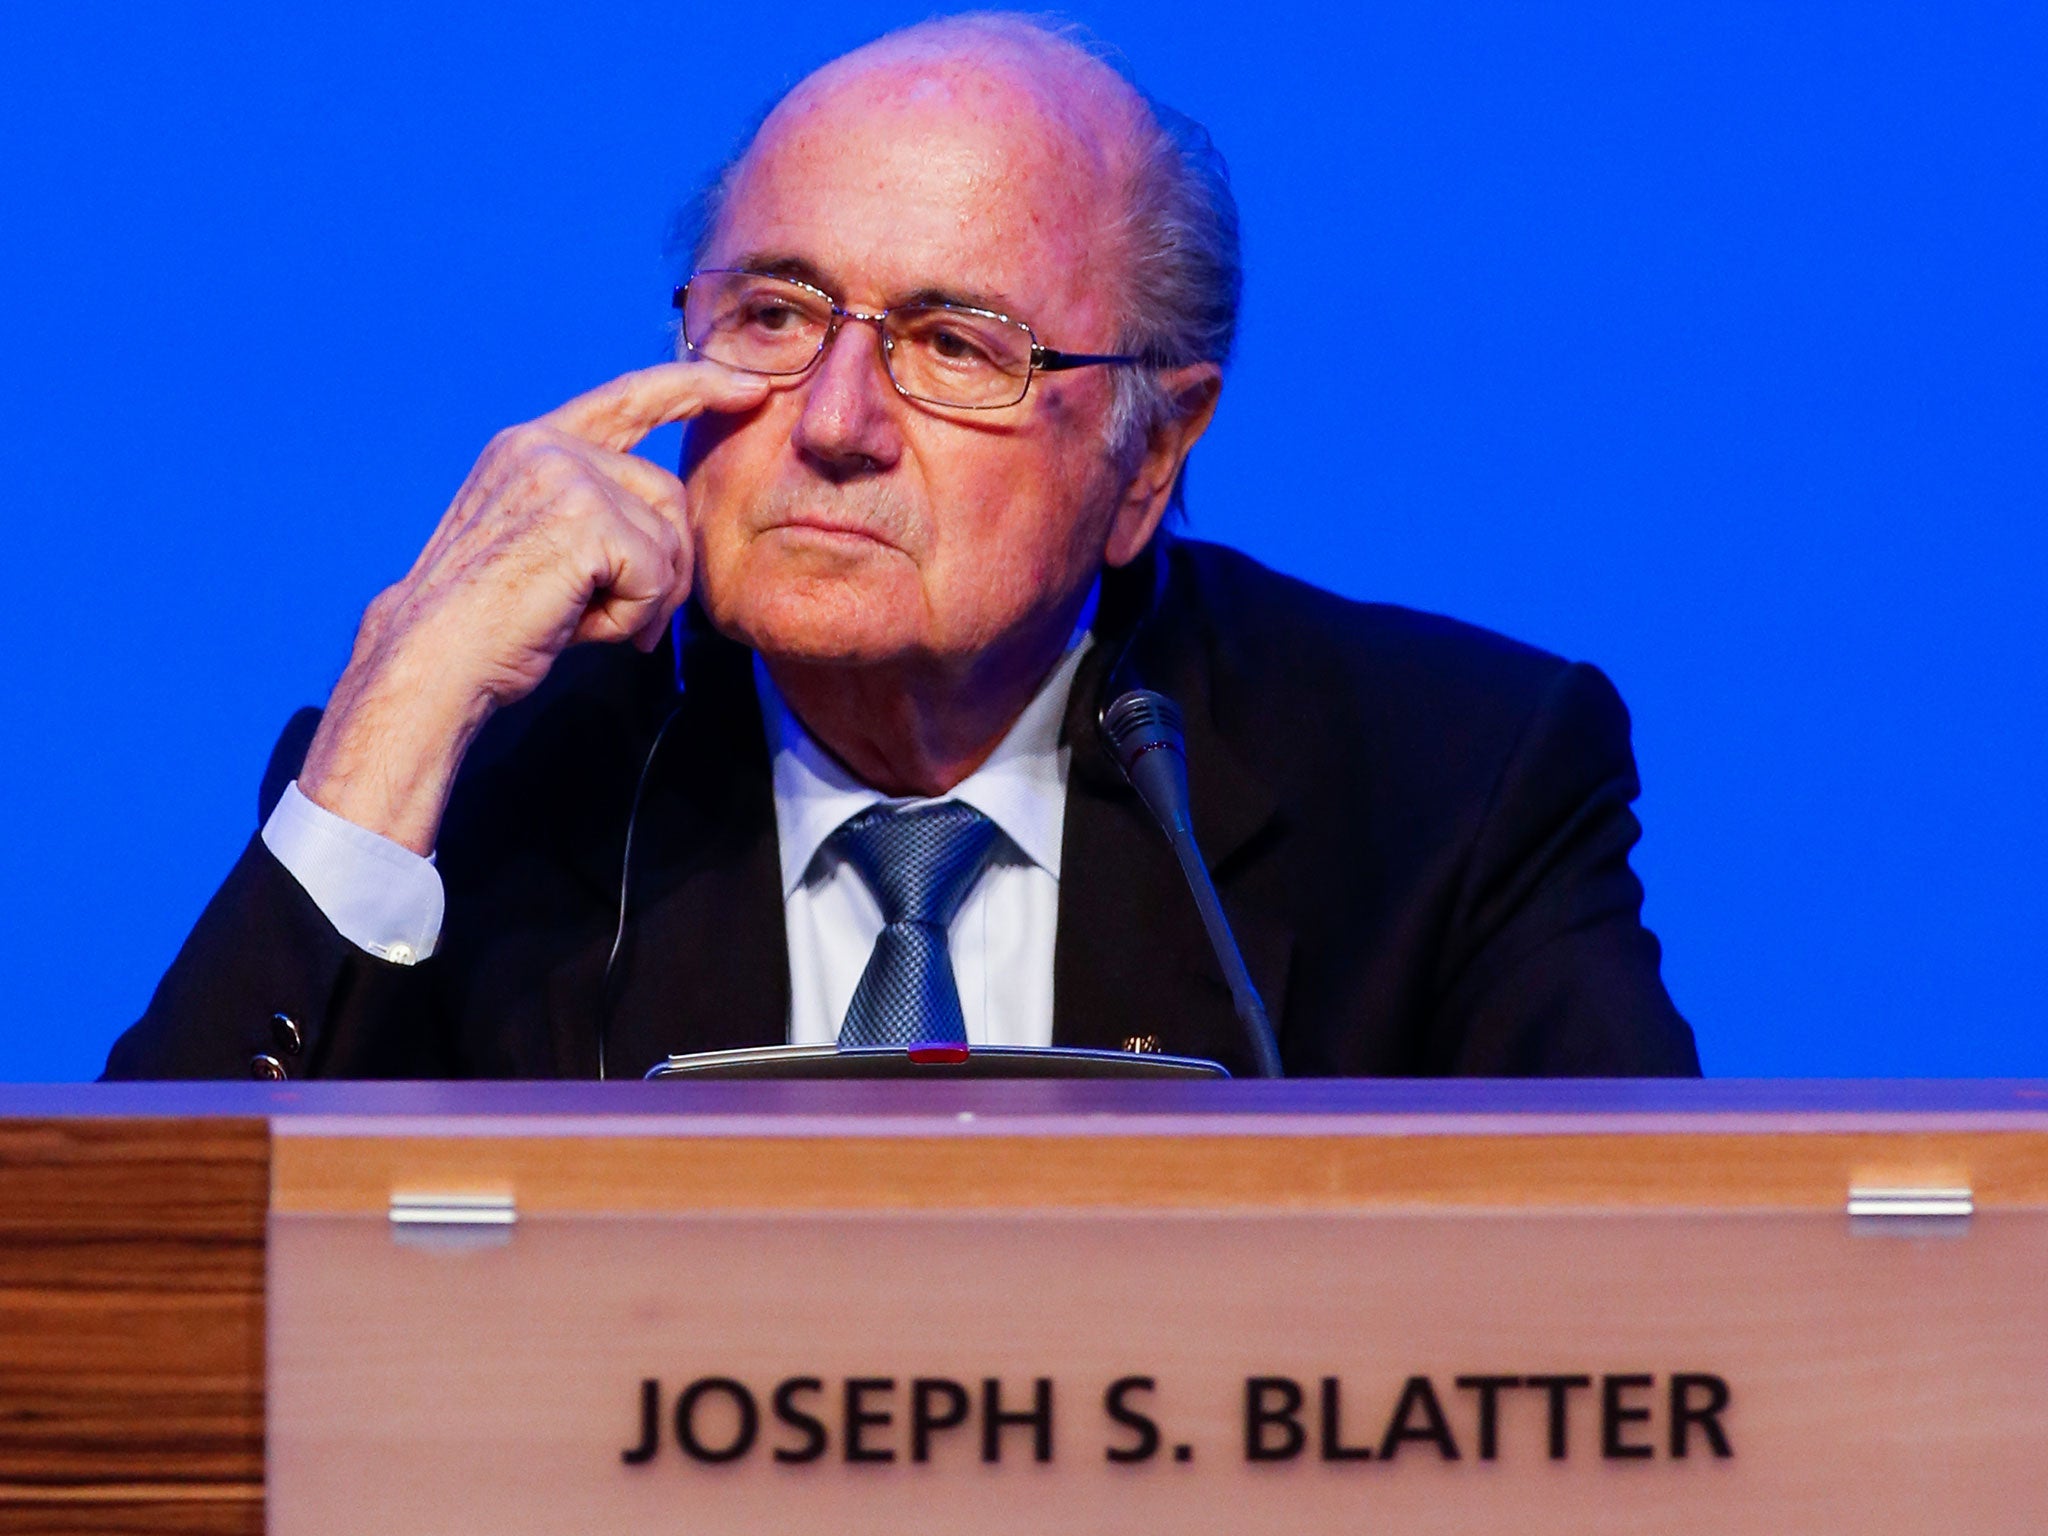 The IOC are particularly embarrassed over Blatter's allegations that racism is behind criticism of the decision to award the 2022 World Cup to Qatar